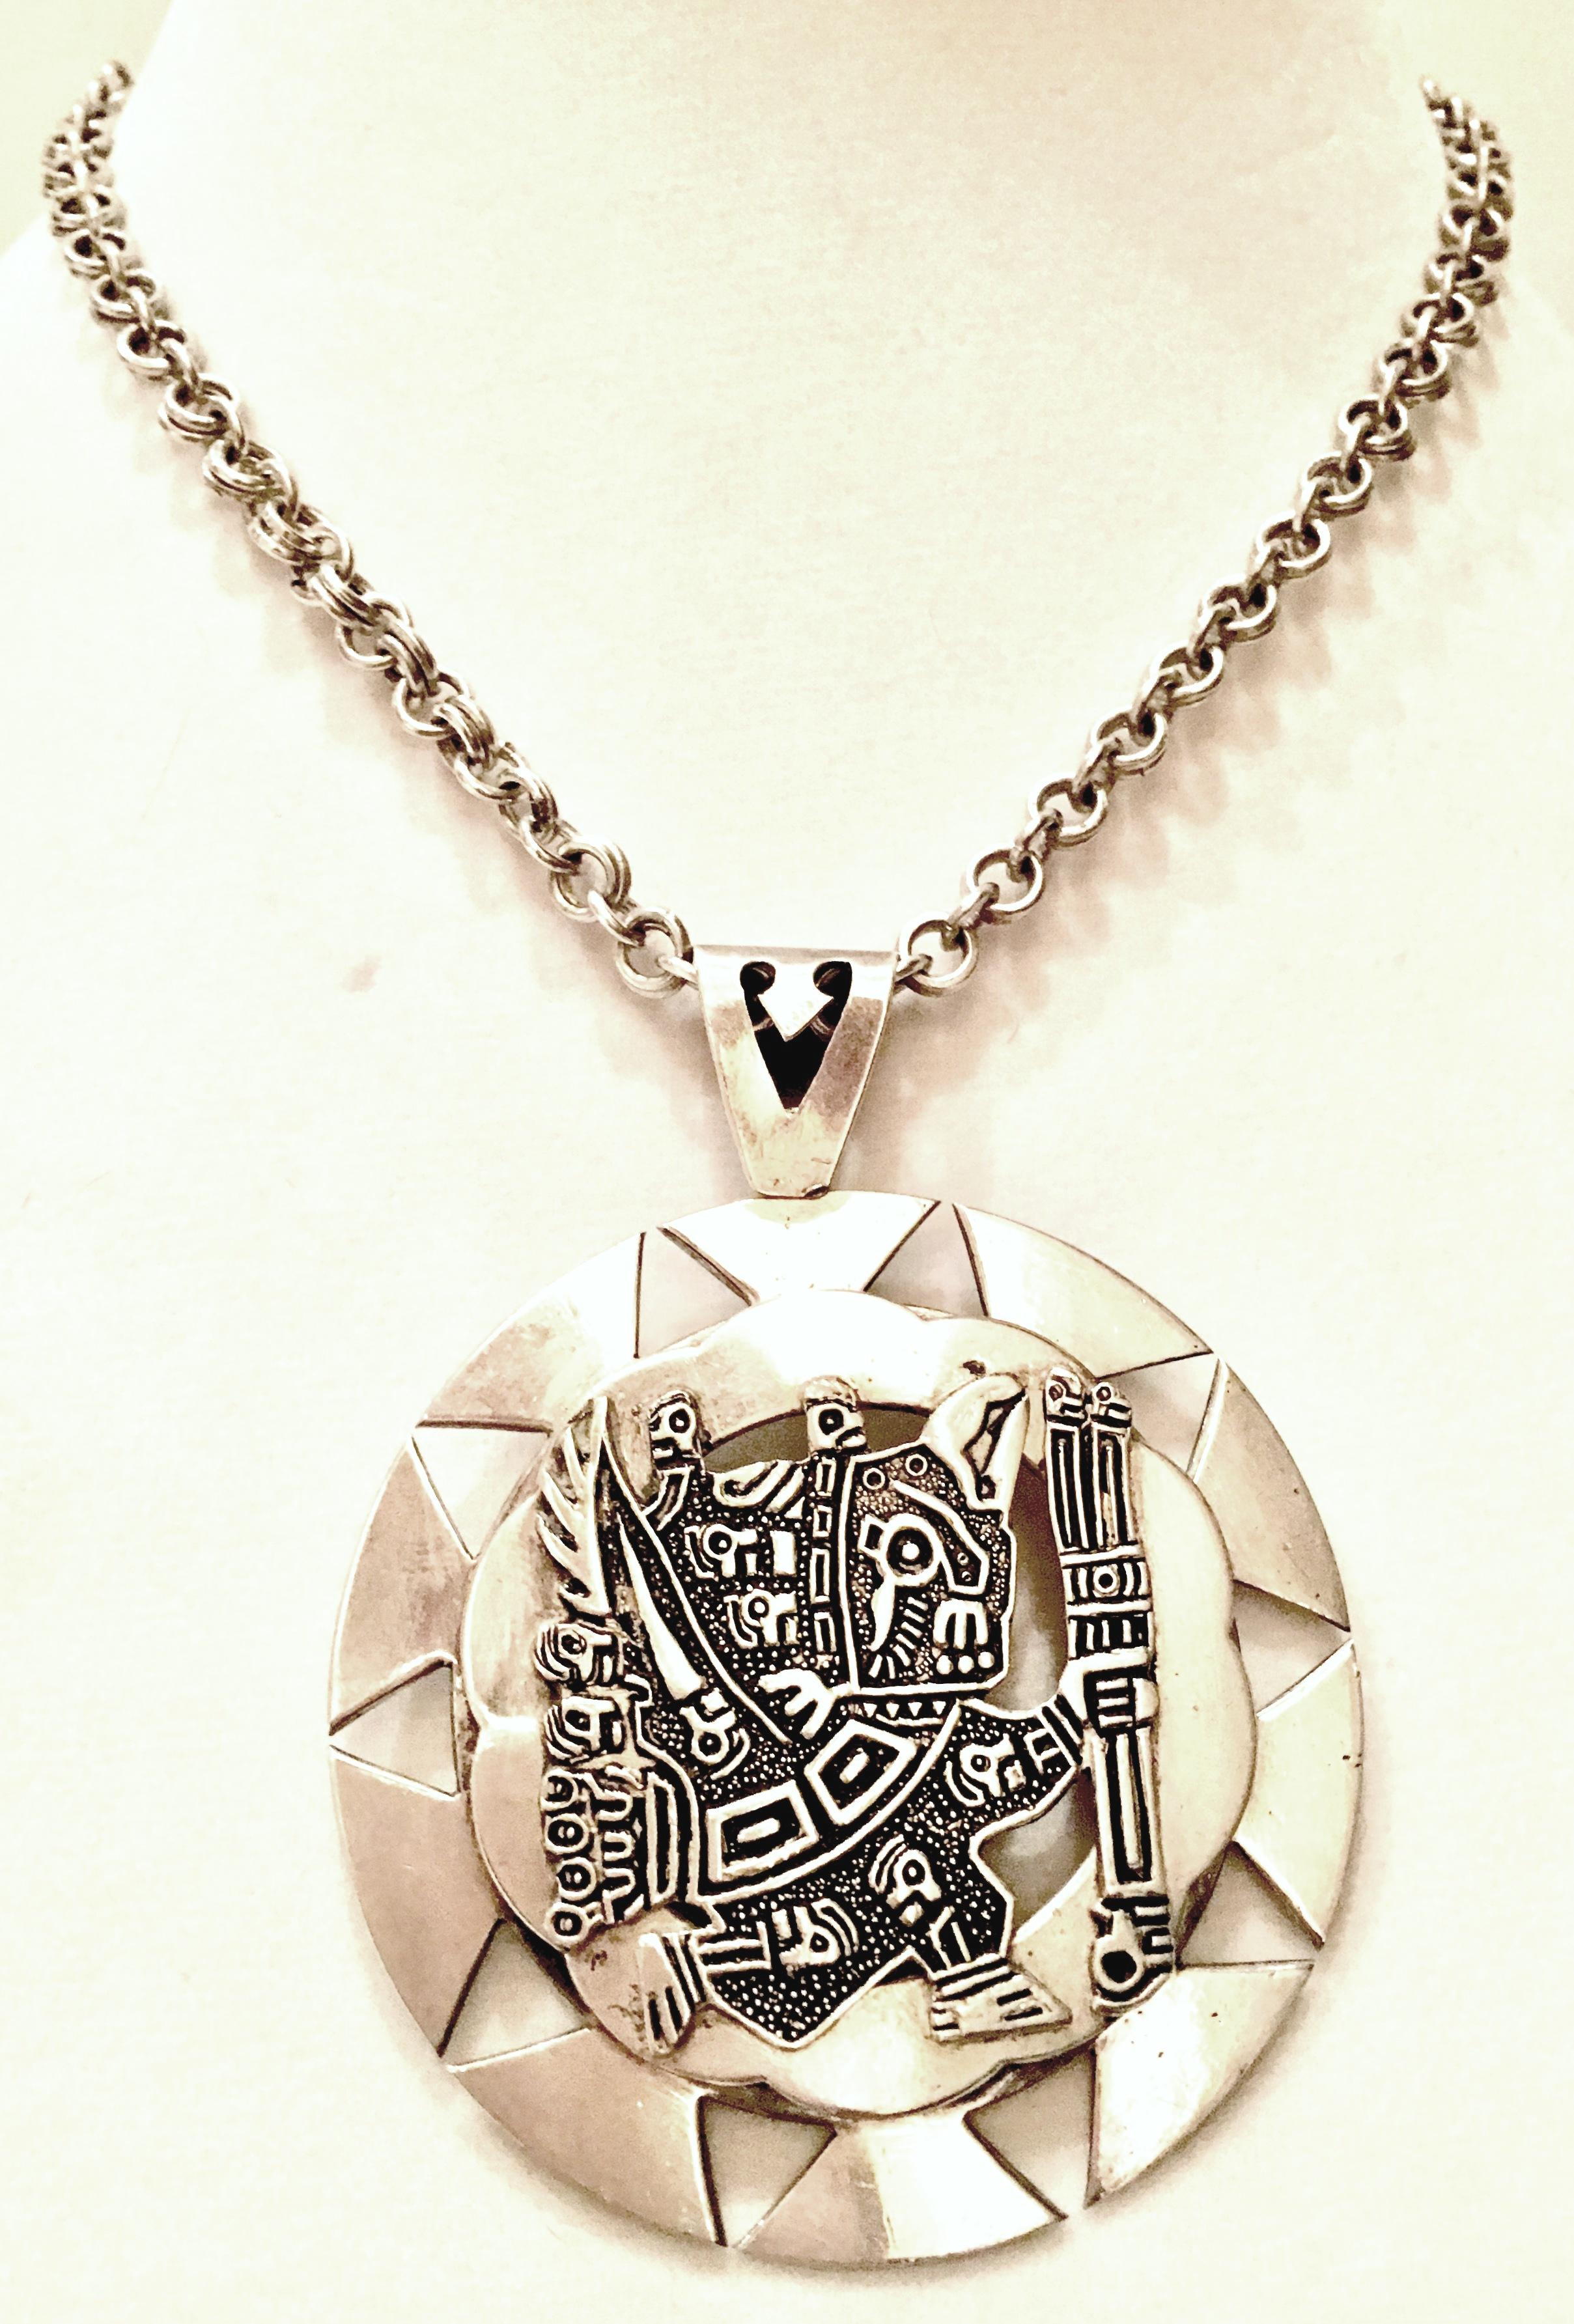 Mid-Century Sterling Silver 925 double layer dimensional sun medallion depicting the Aztec Mythical Sun God in motion pendant necklace. This pendant hangs on a sterling silver double link chain with hook and ball closure. The medallion or pendant is